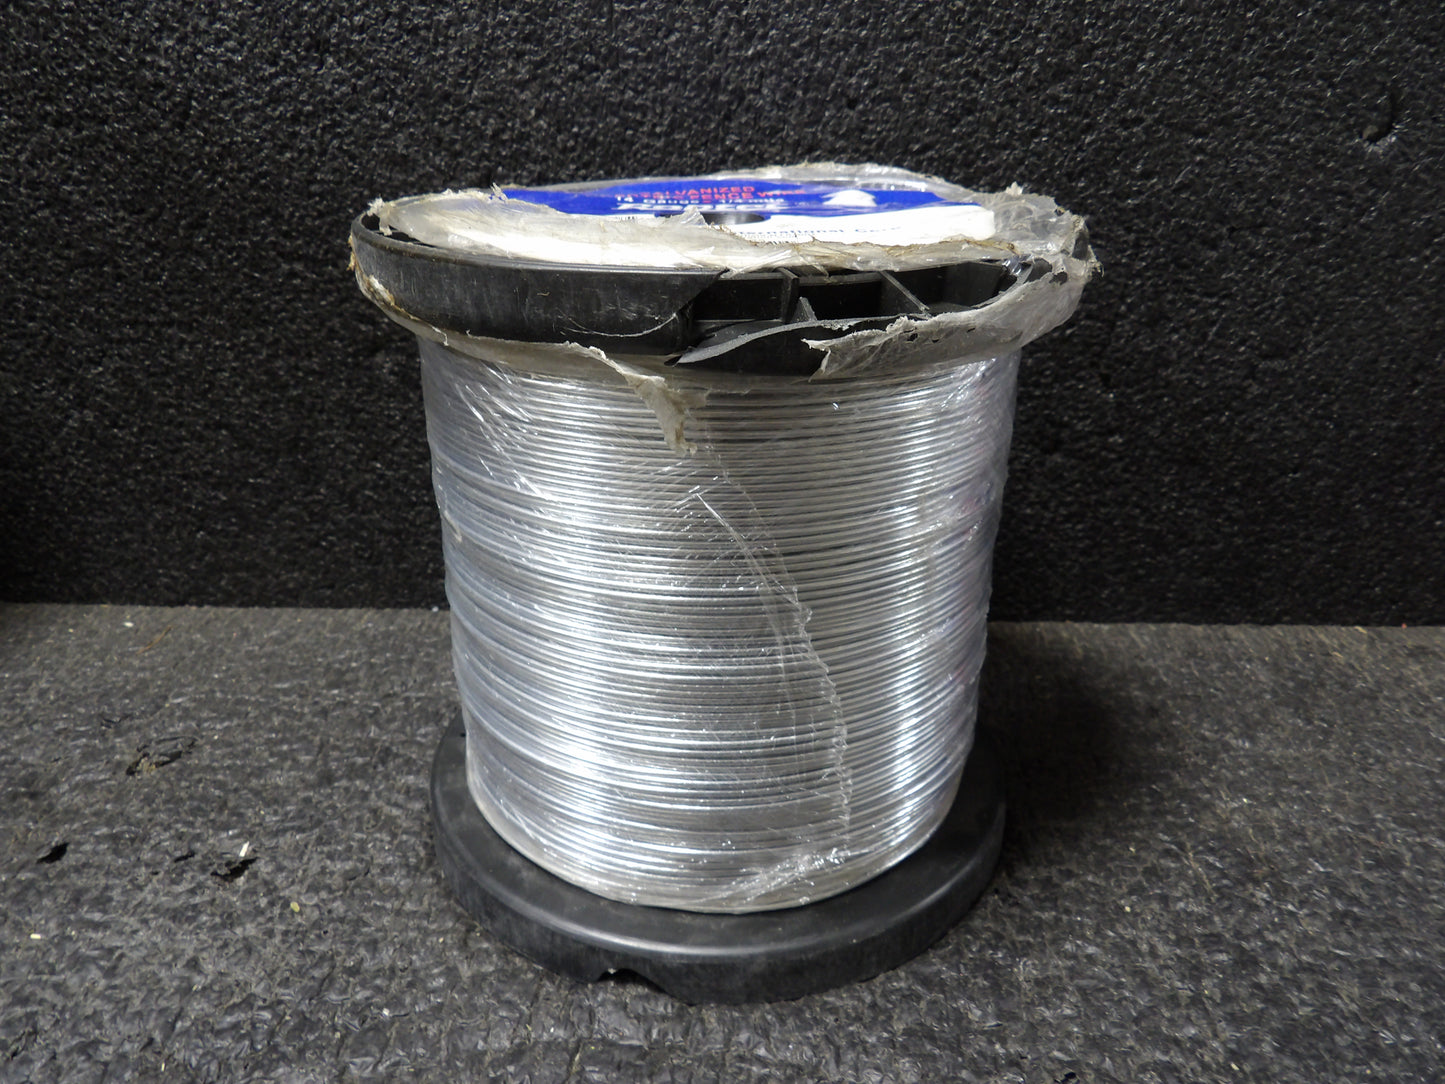 Robtec Galvanized Electric Fence Wire: 14 Gauge, 1,320 ft Lg, 1/4 Mile (CR00867-WTA27)